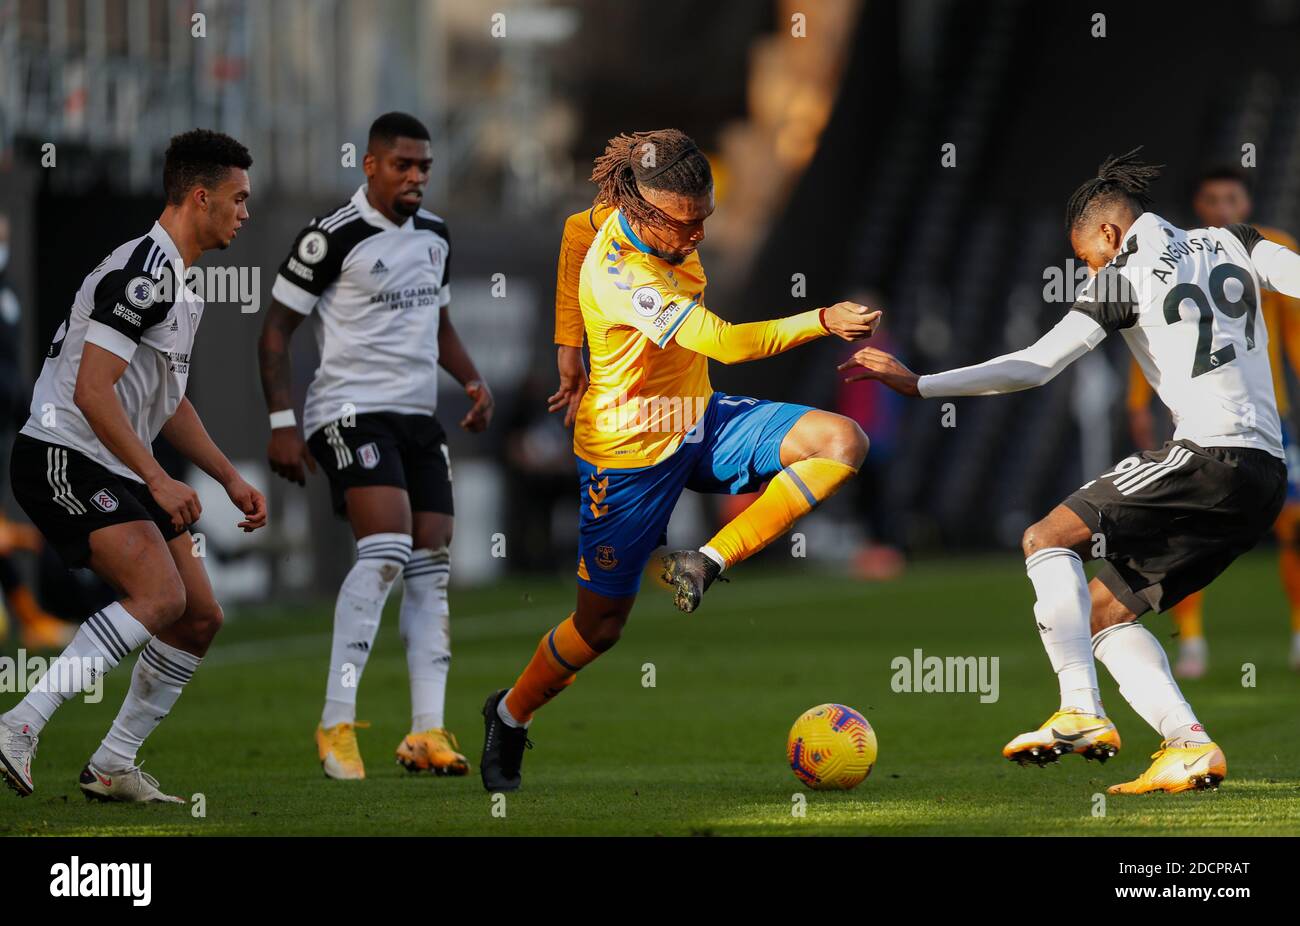 London, Britain. 22nd Nov, 2020. Everton's Alex Iwobi (2nd R) vies with Fulham's Andre-Frank Zambo Anguissa (1st R) during the English Premier League between Fulham and Everton in London, Britain, Nov. 22, 2020. Credit: Han Yan/Xinhua/Alamy Live News Stock Photo